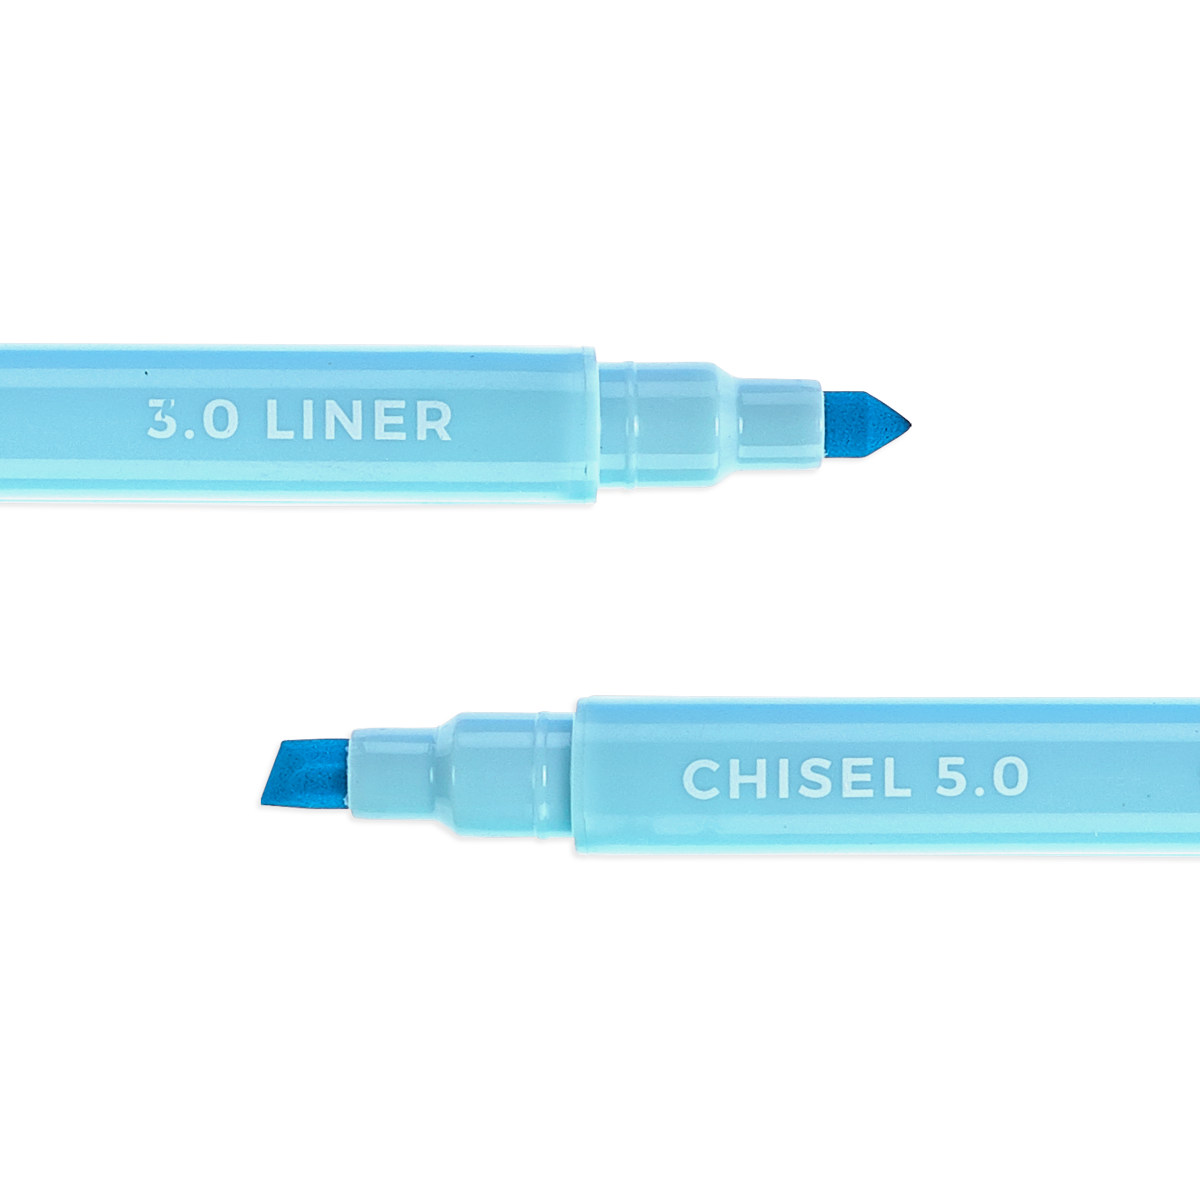 Ooly Double-Sided Pastel Liner Set of 8 Markers